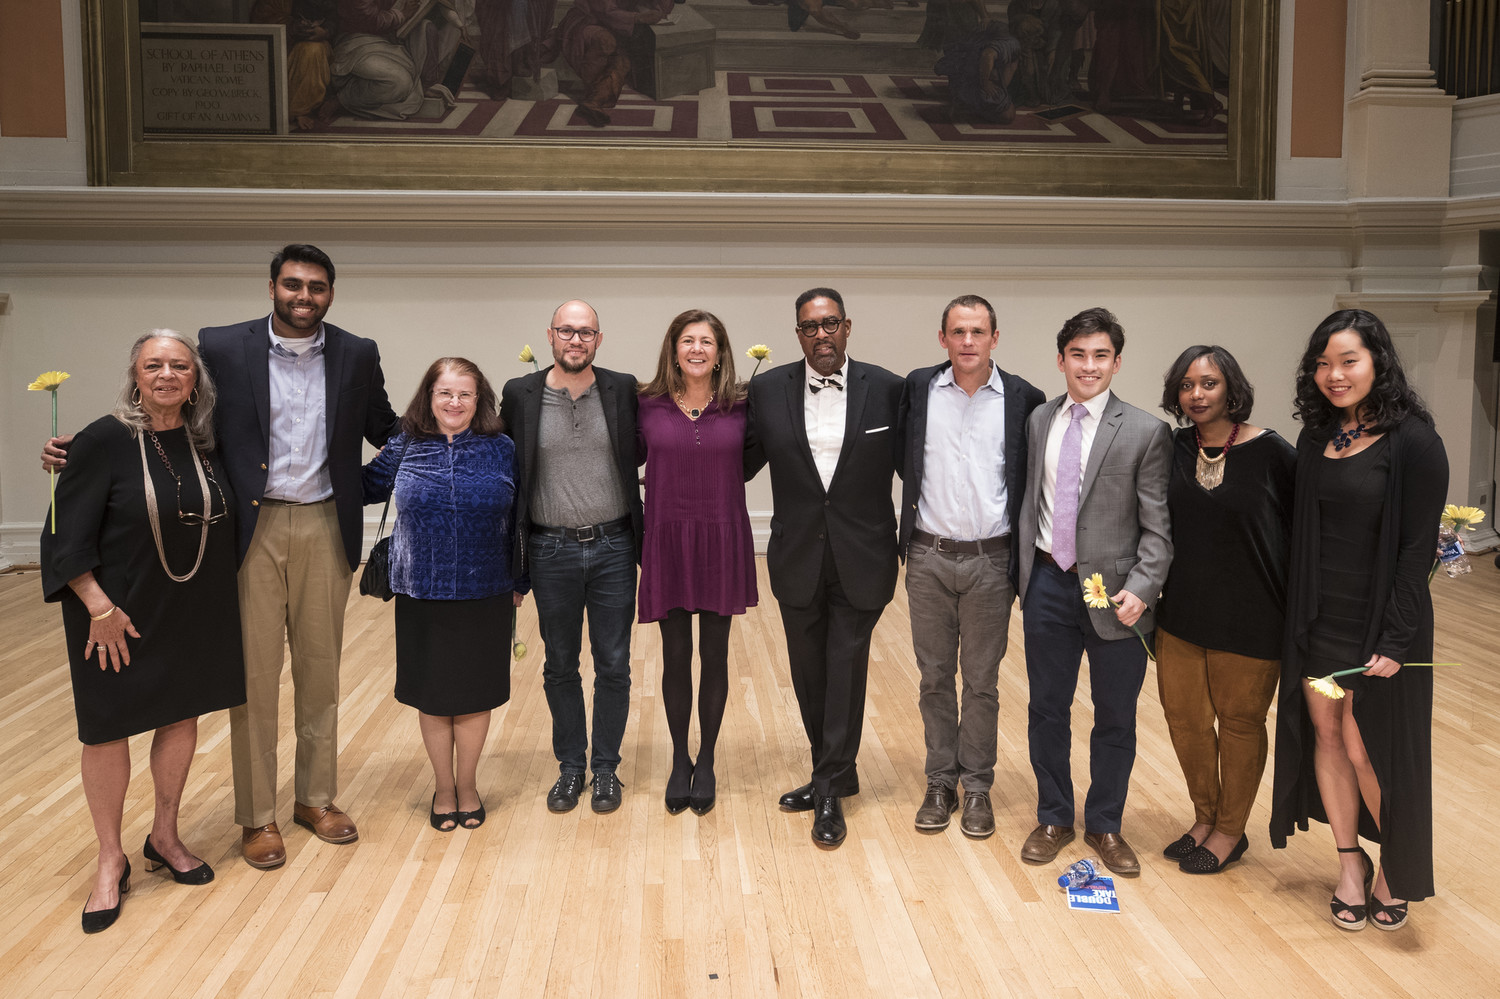 Double Take participants – including Rehan Baddeliyanage, second from the left and President Jim Ryan, fourth from right – gather onstage in the Old Cabell Hall Auditorium. The storytelling event capped Inauguration Weekend activities.